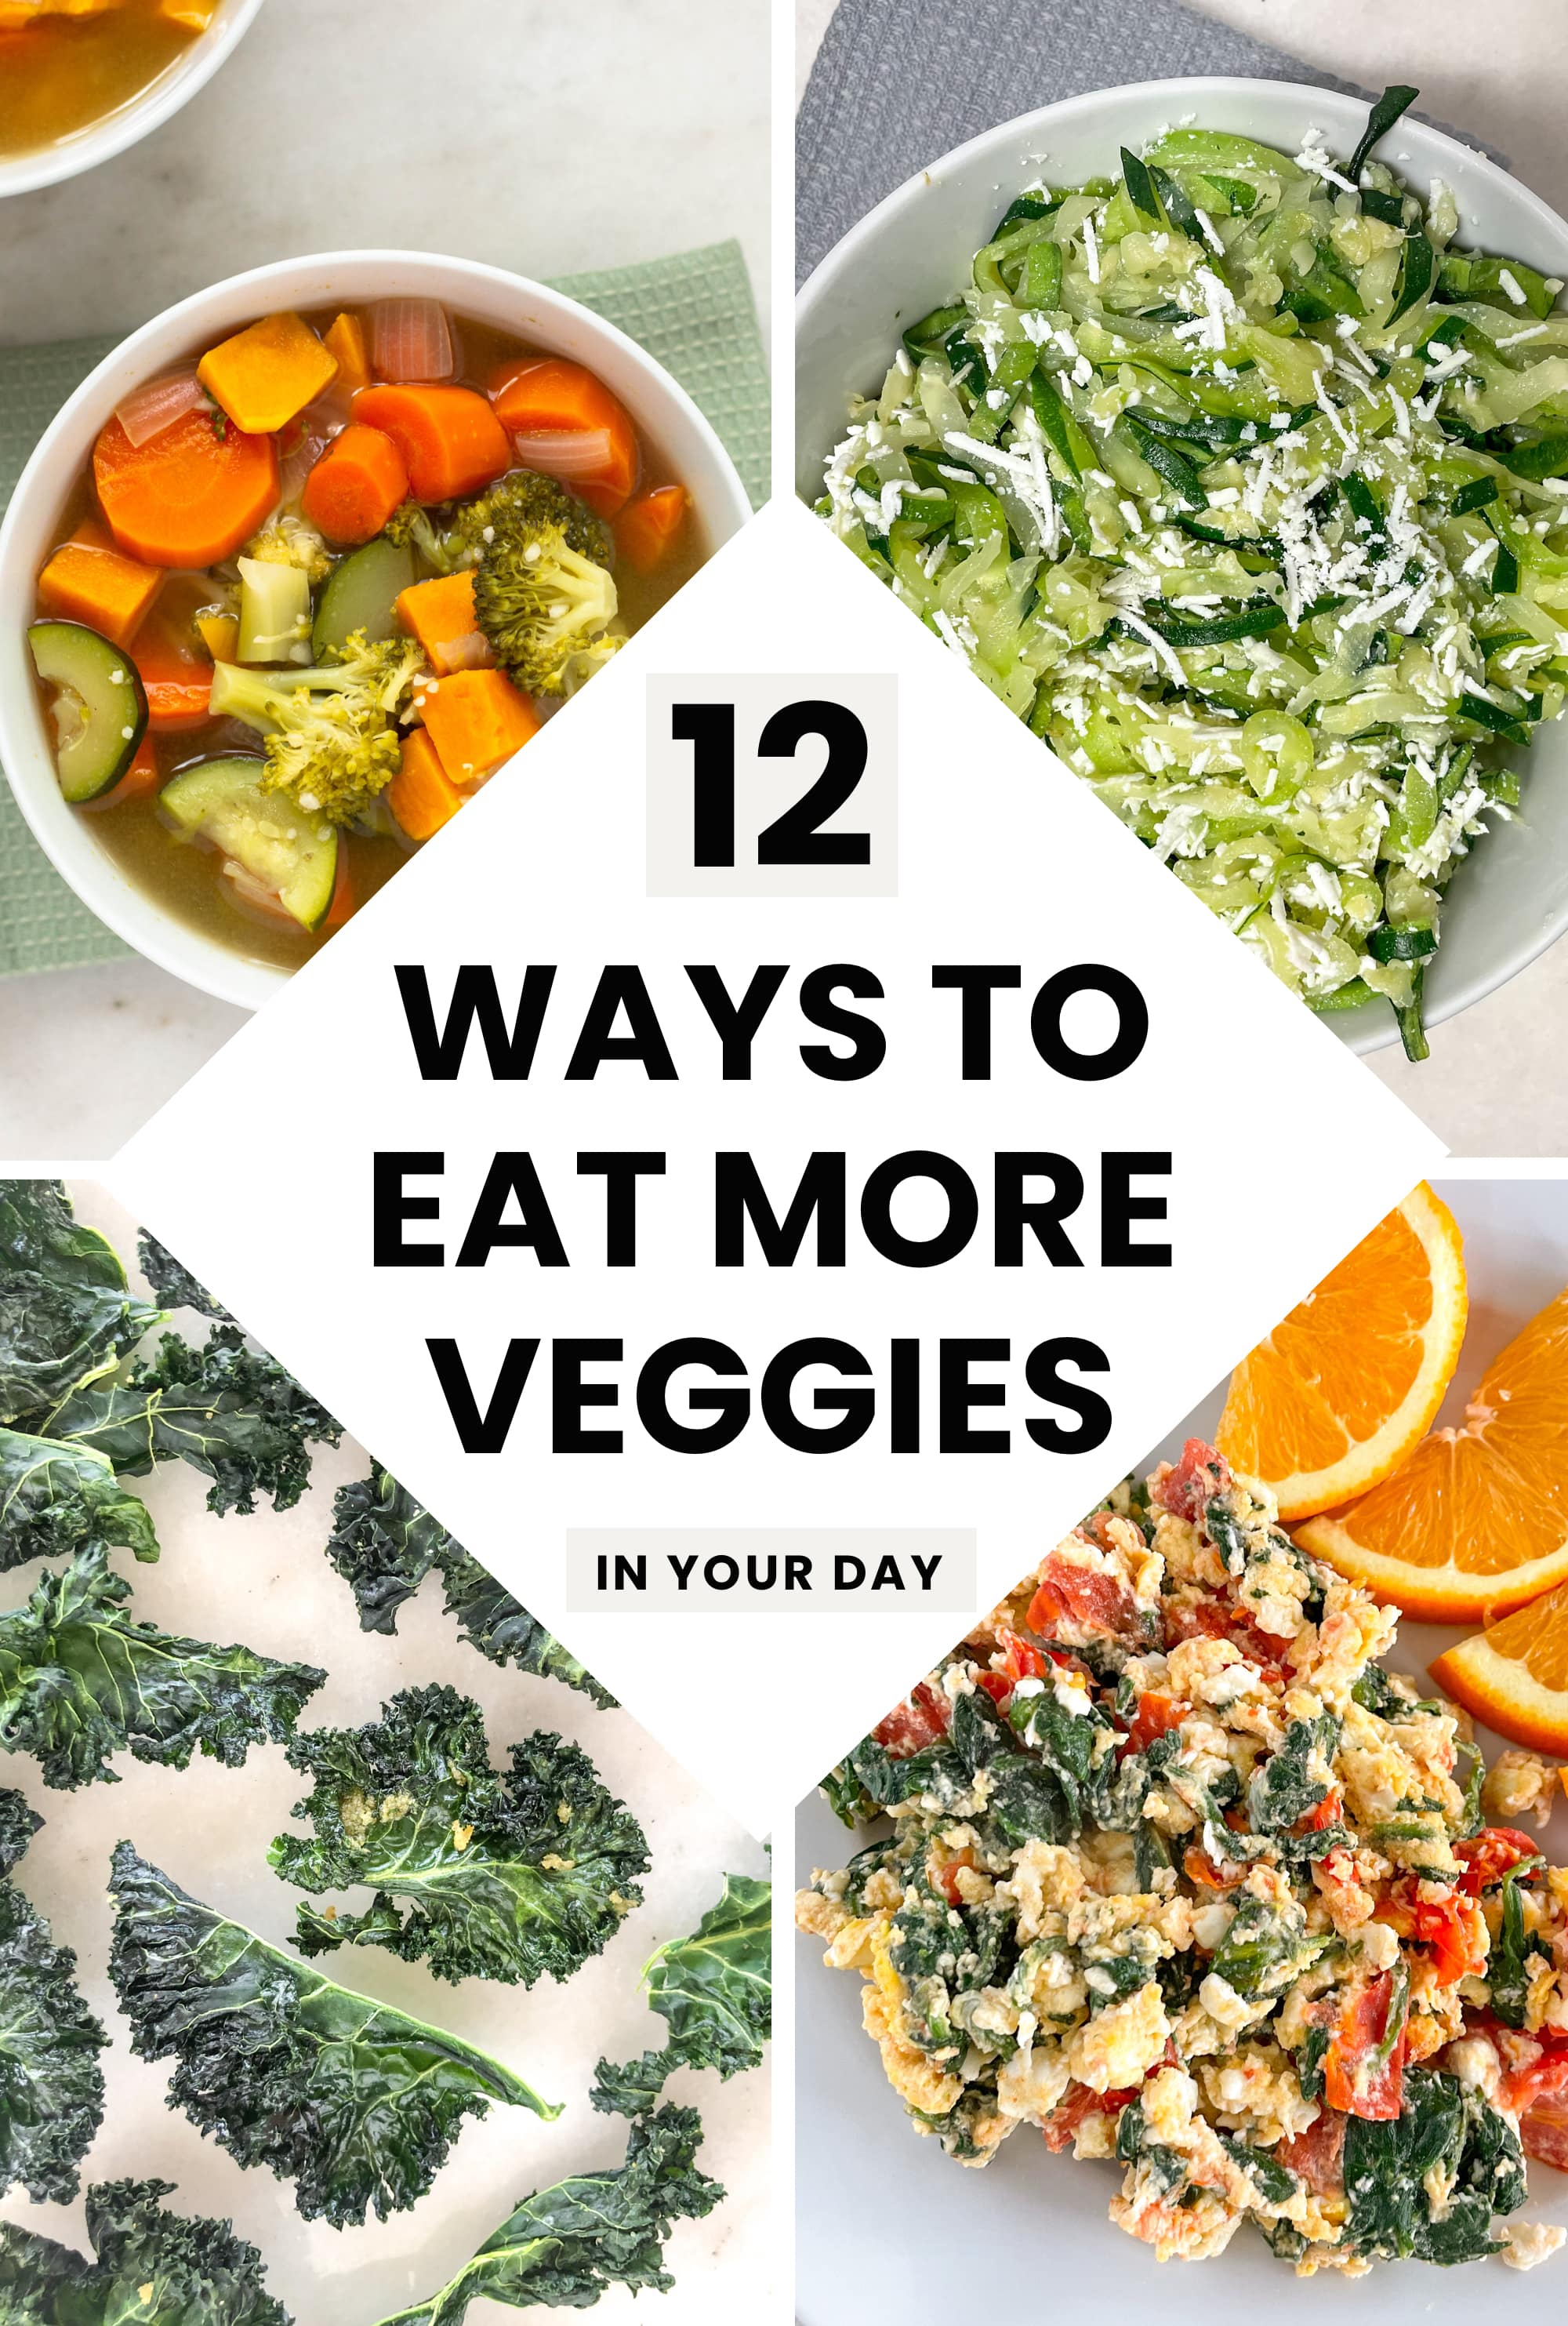 12 Fun Ways to Eat More Vegetables in Your Day - Full of wholesome